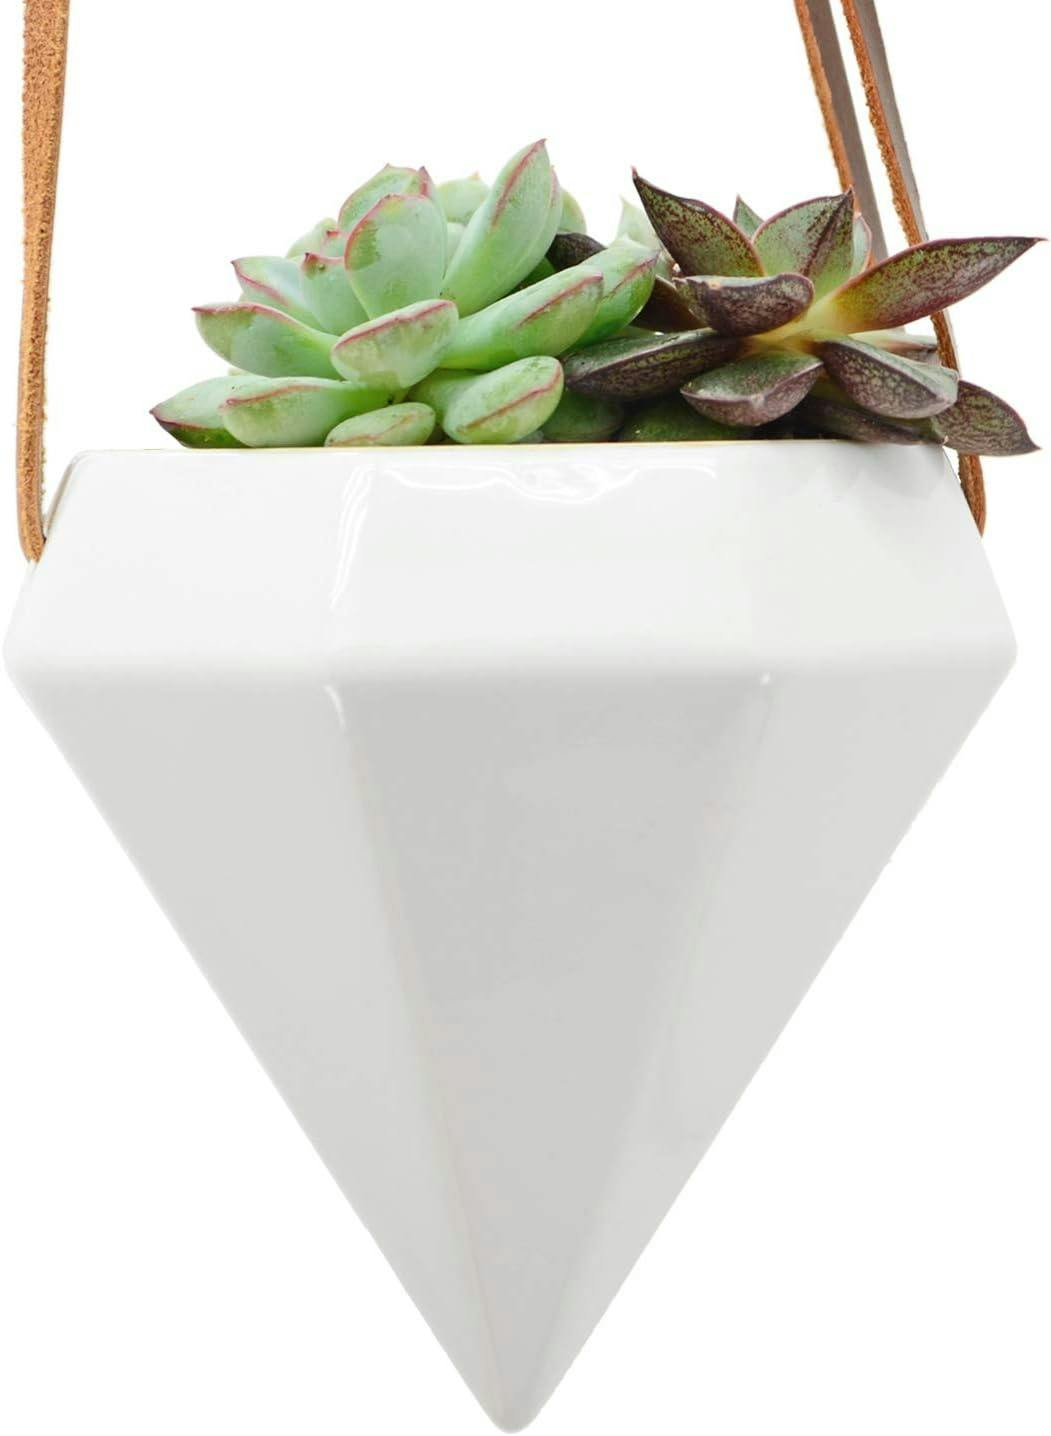 Gloss White Diamond Ceramic Hanging Planter with Leather Rope